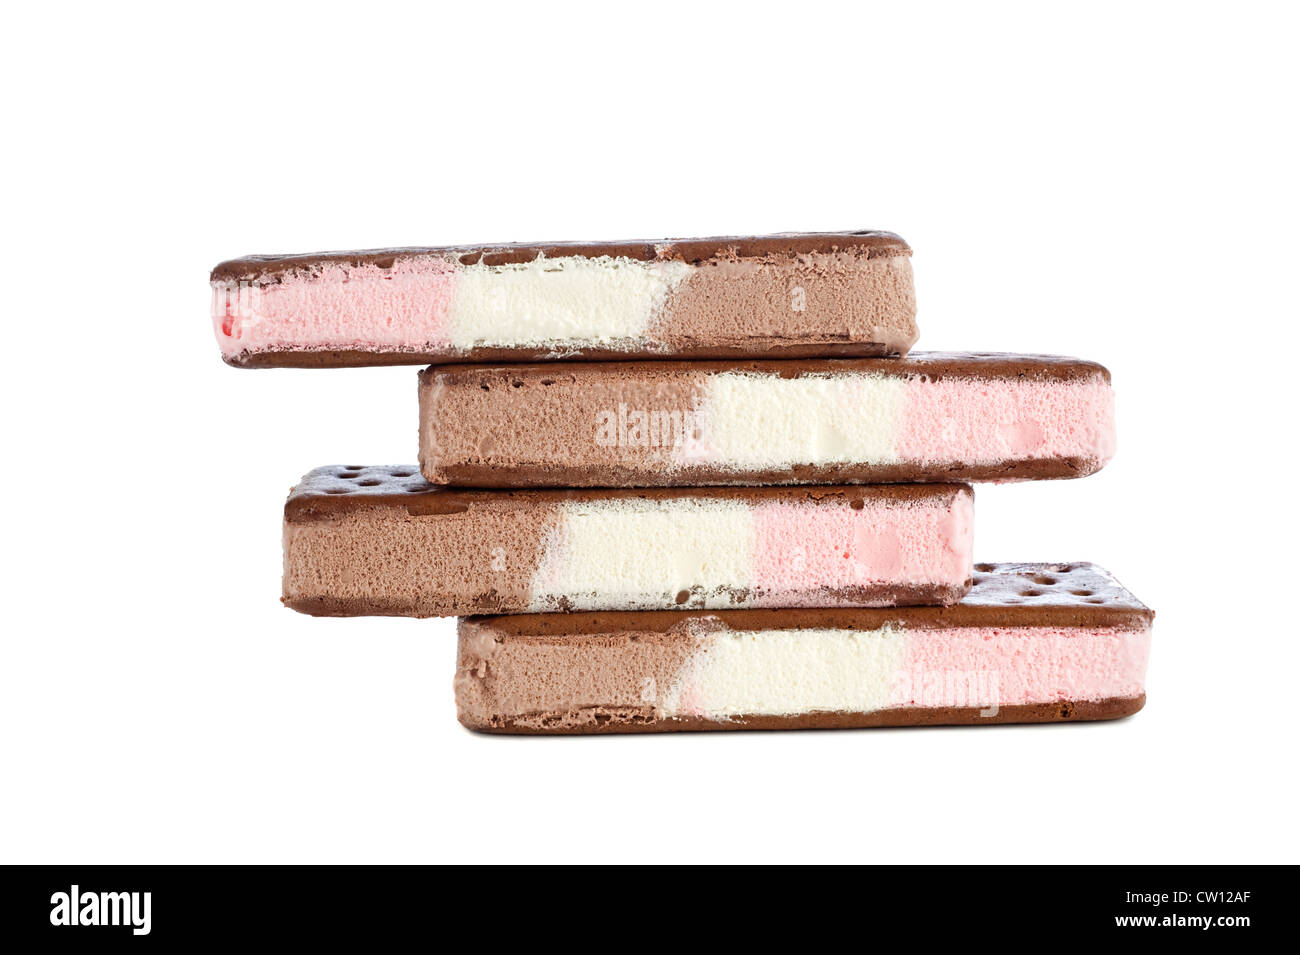 Four stacked Neapolitan ice cream sandwiches with vanilla, chocolate and strawberry flavors Stock Photo